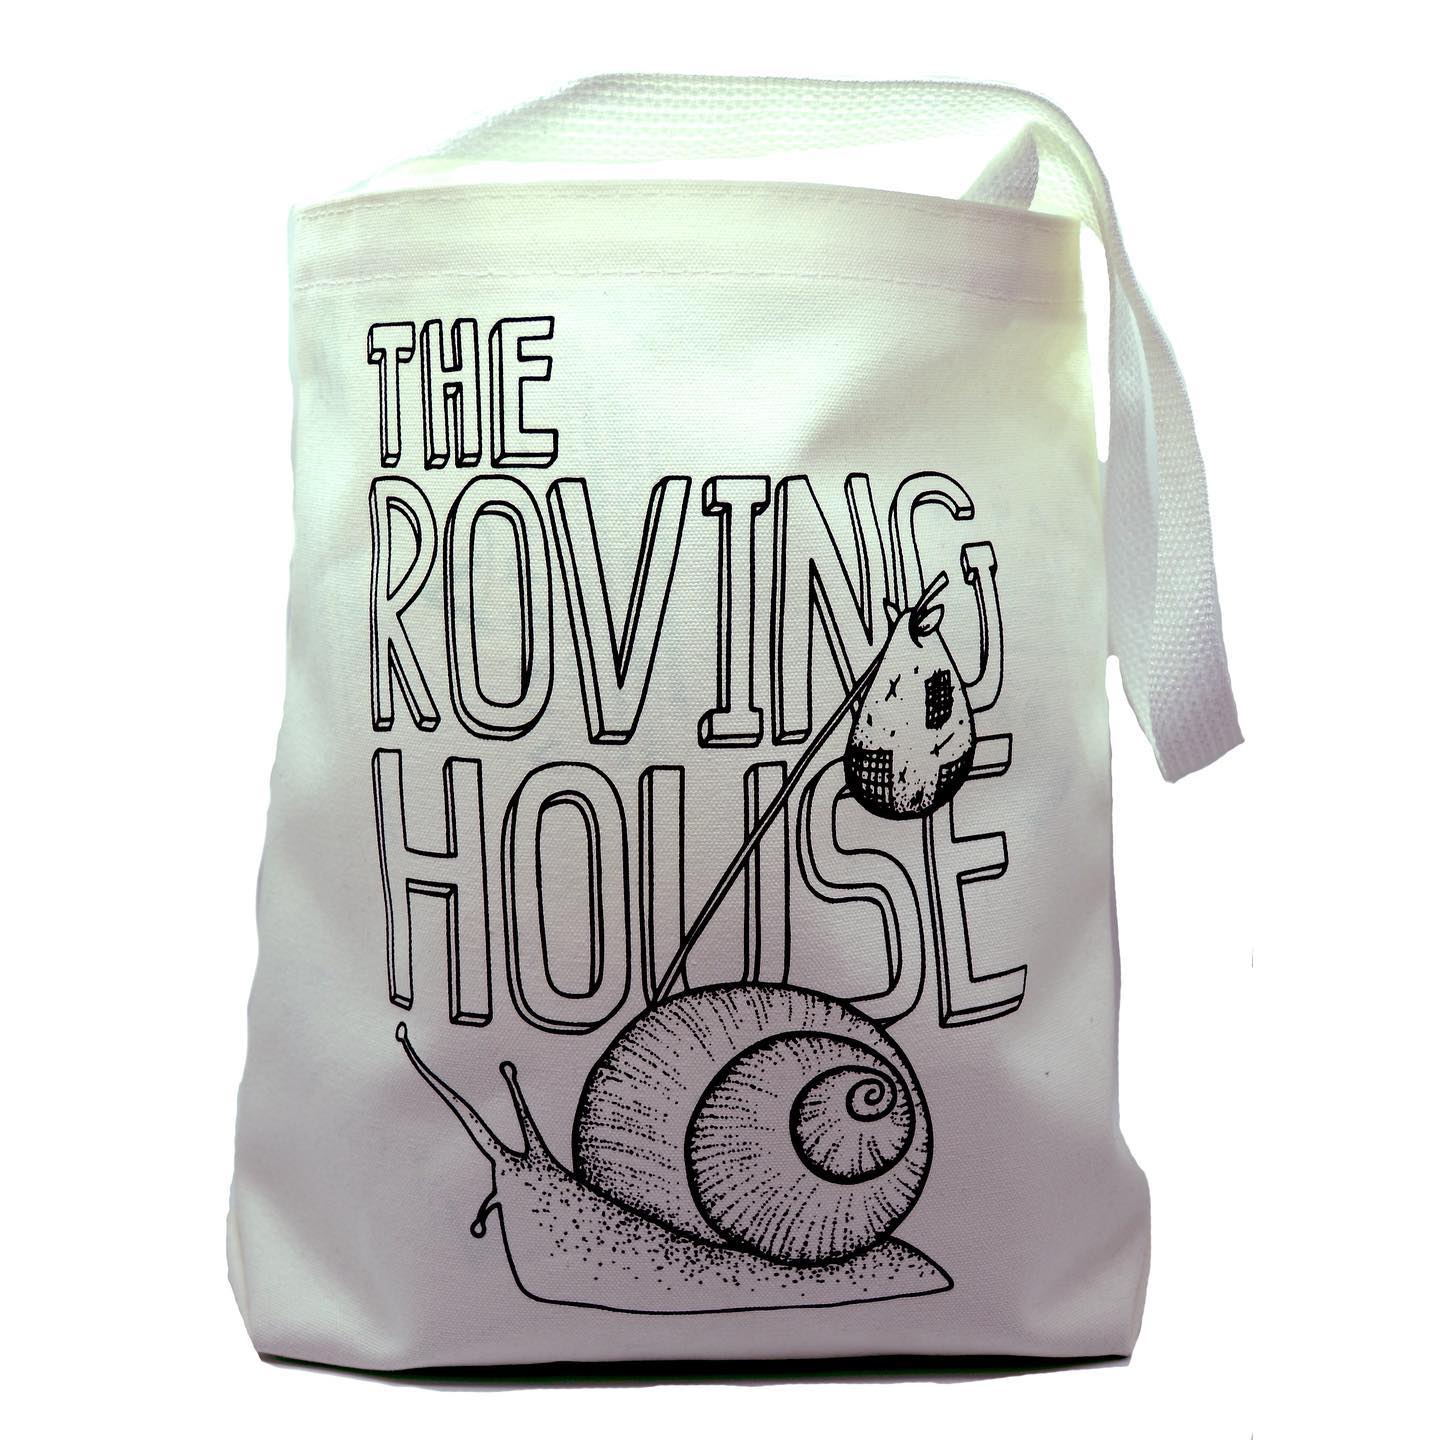 The Roving House